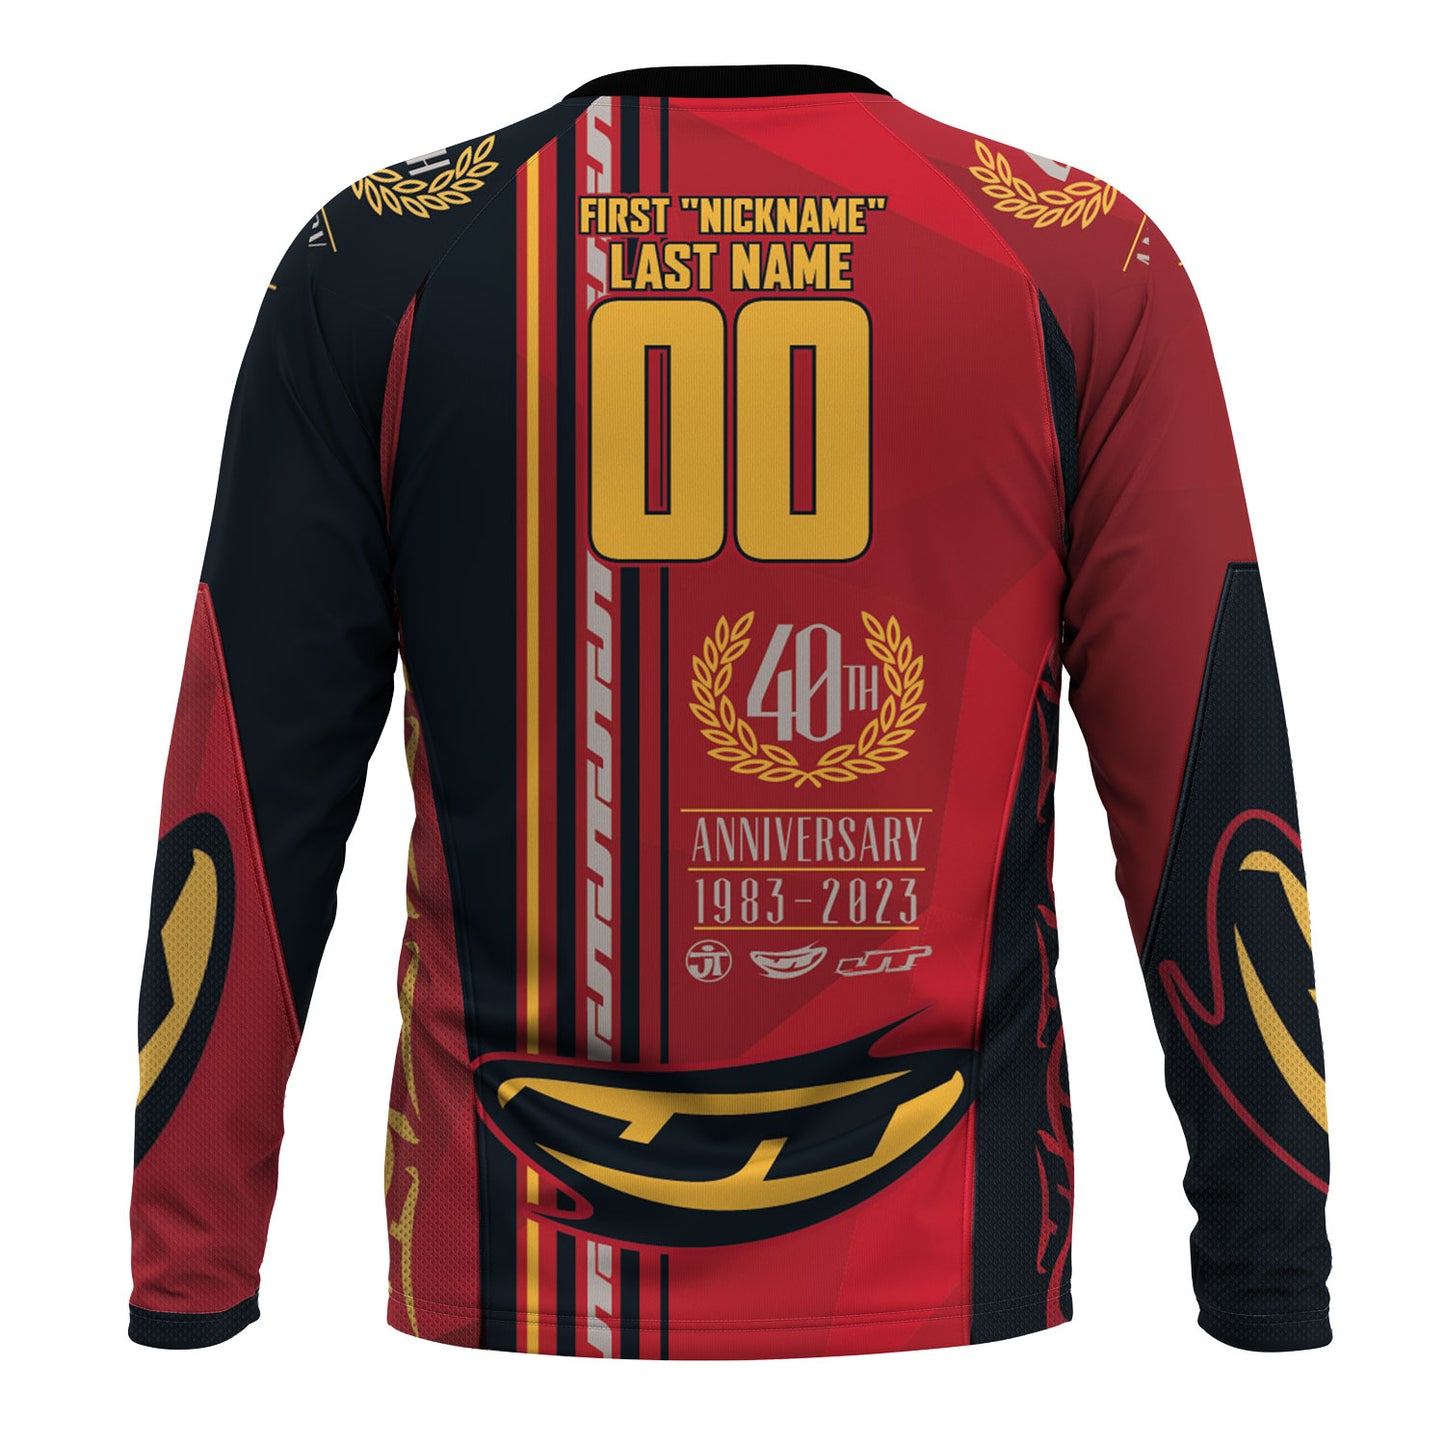 JT 40th Anniversary Contact Jersey